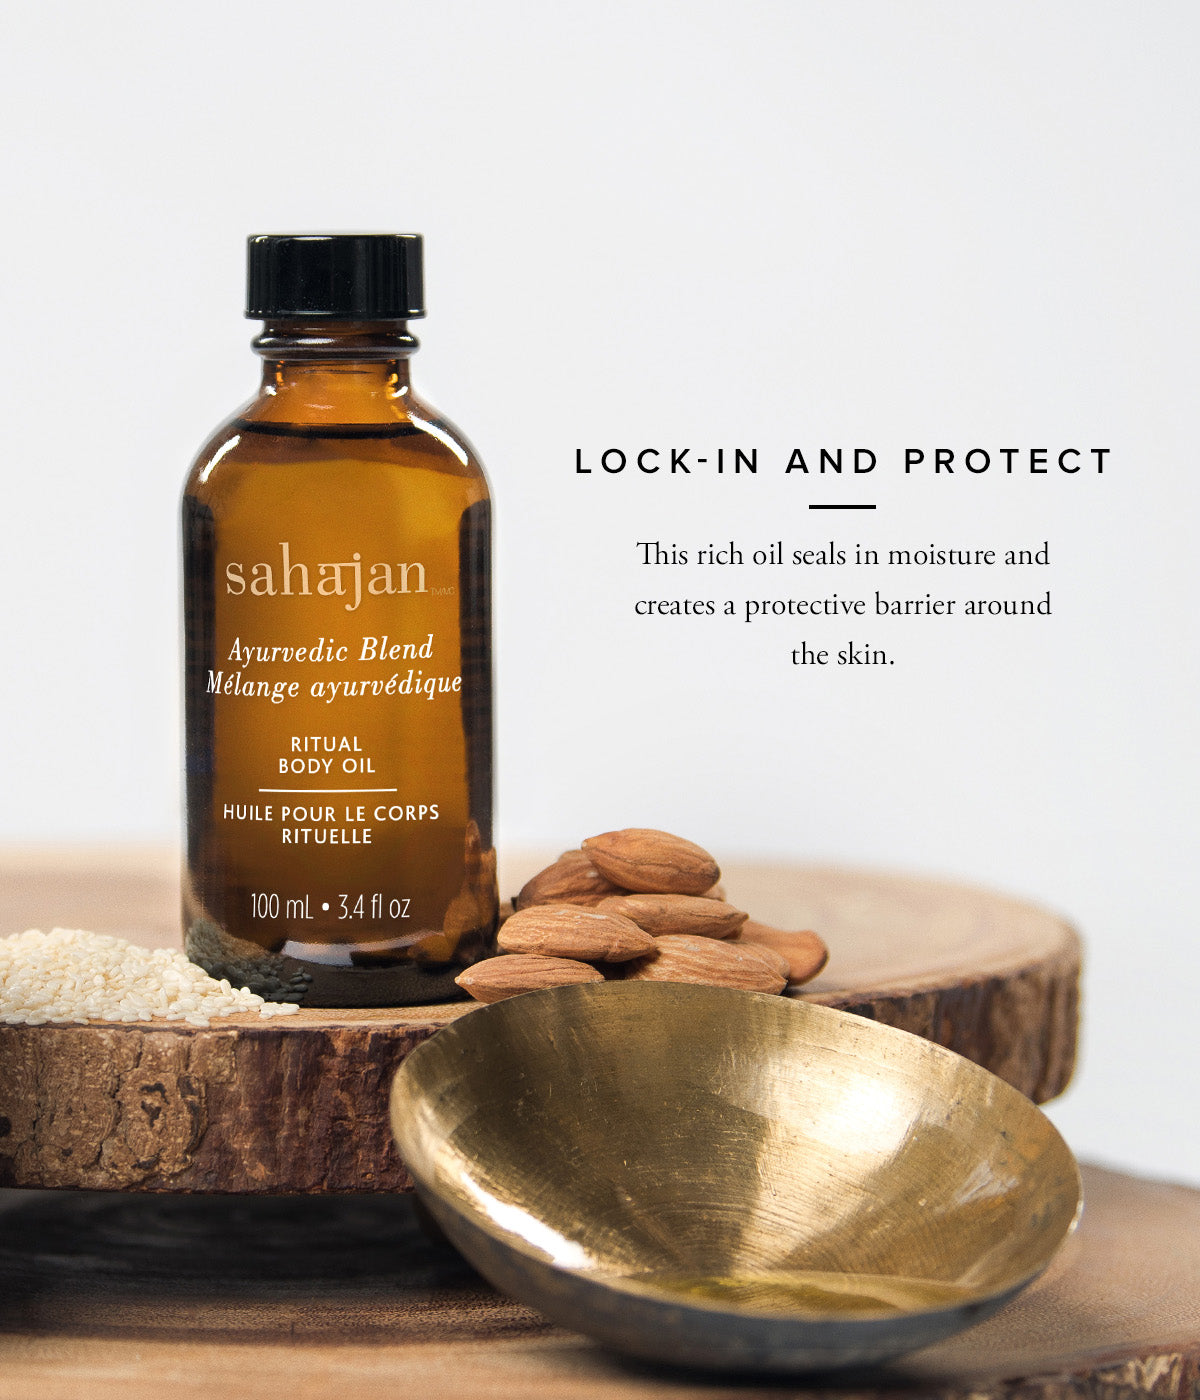 Lock-in and Protect-   This rich oil seals in moisture and creates a protective barrier around the skin